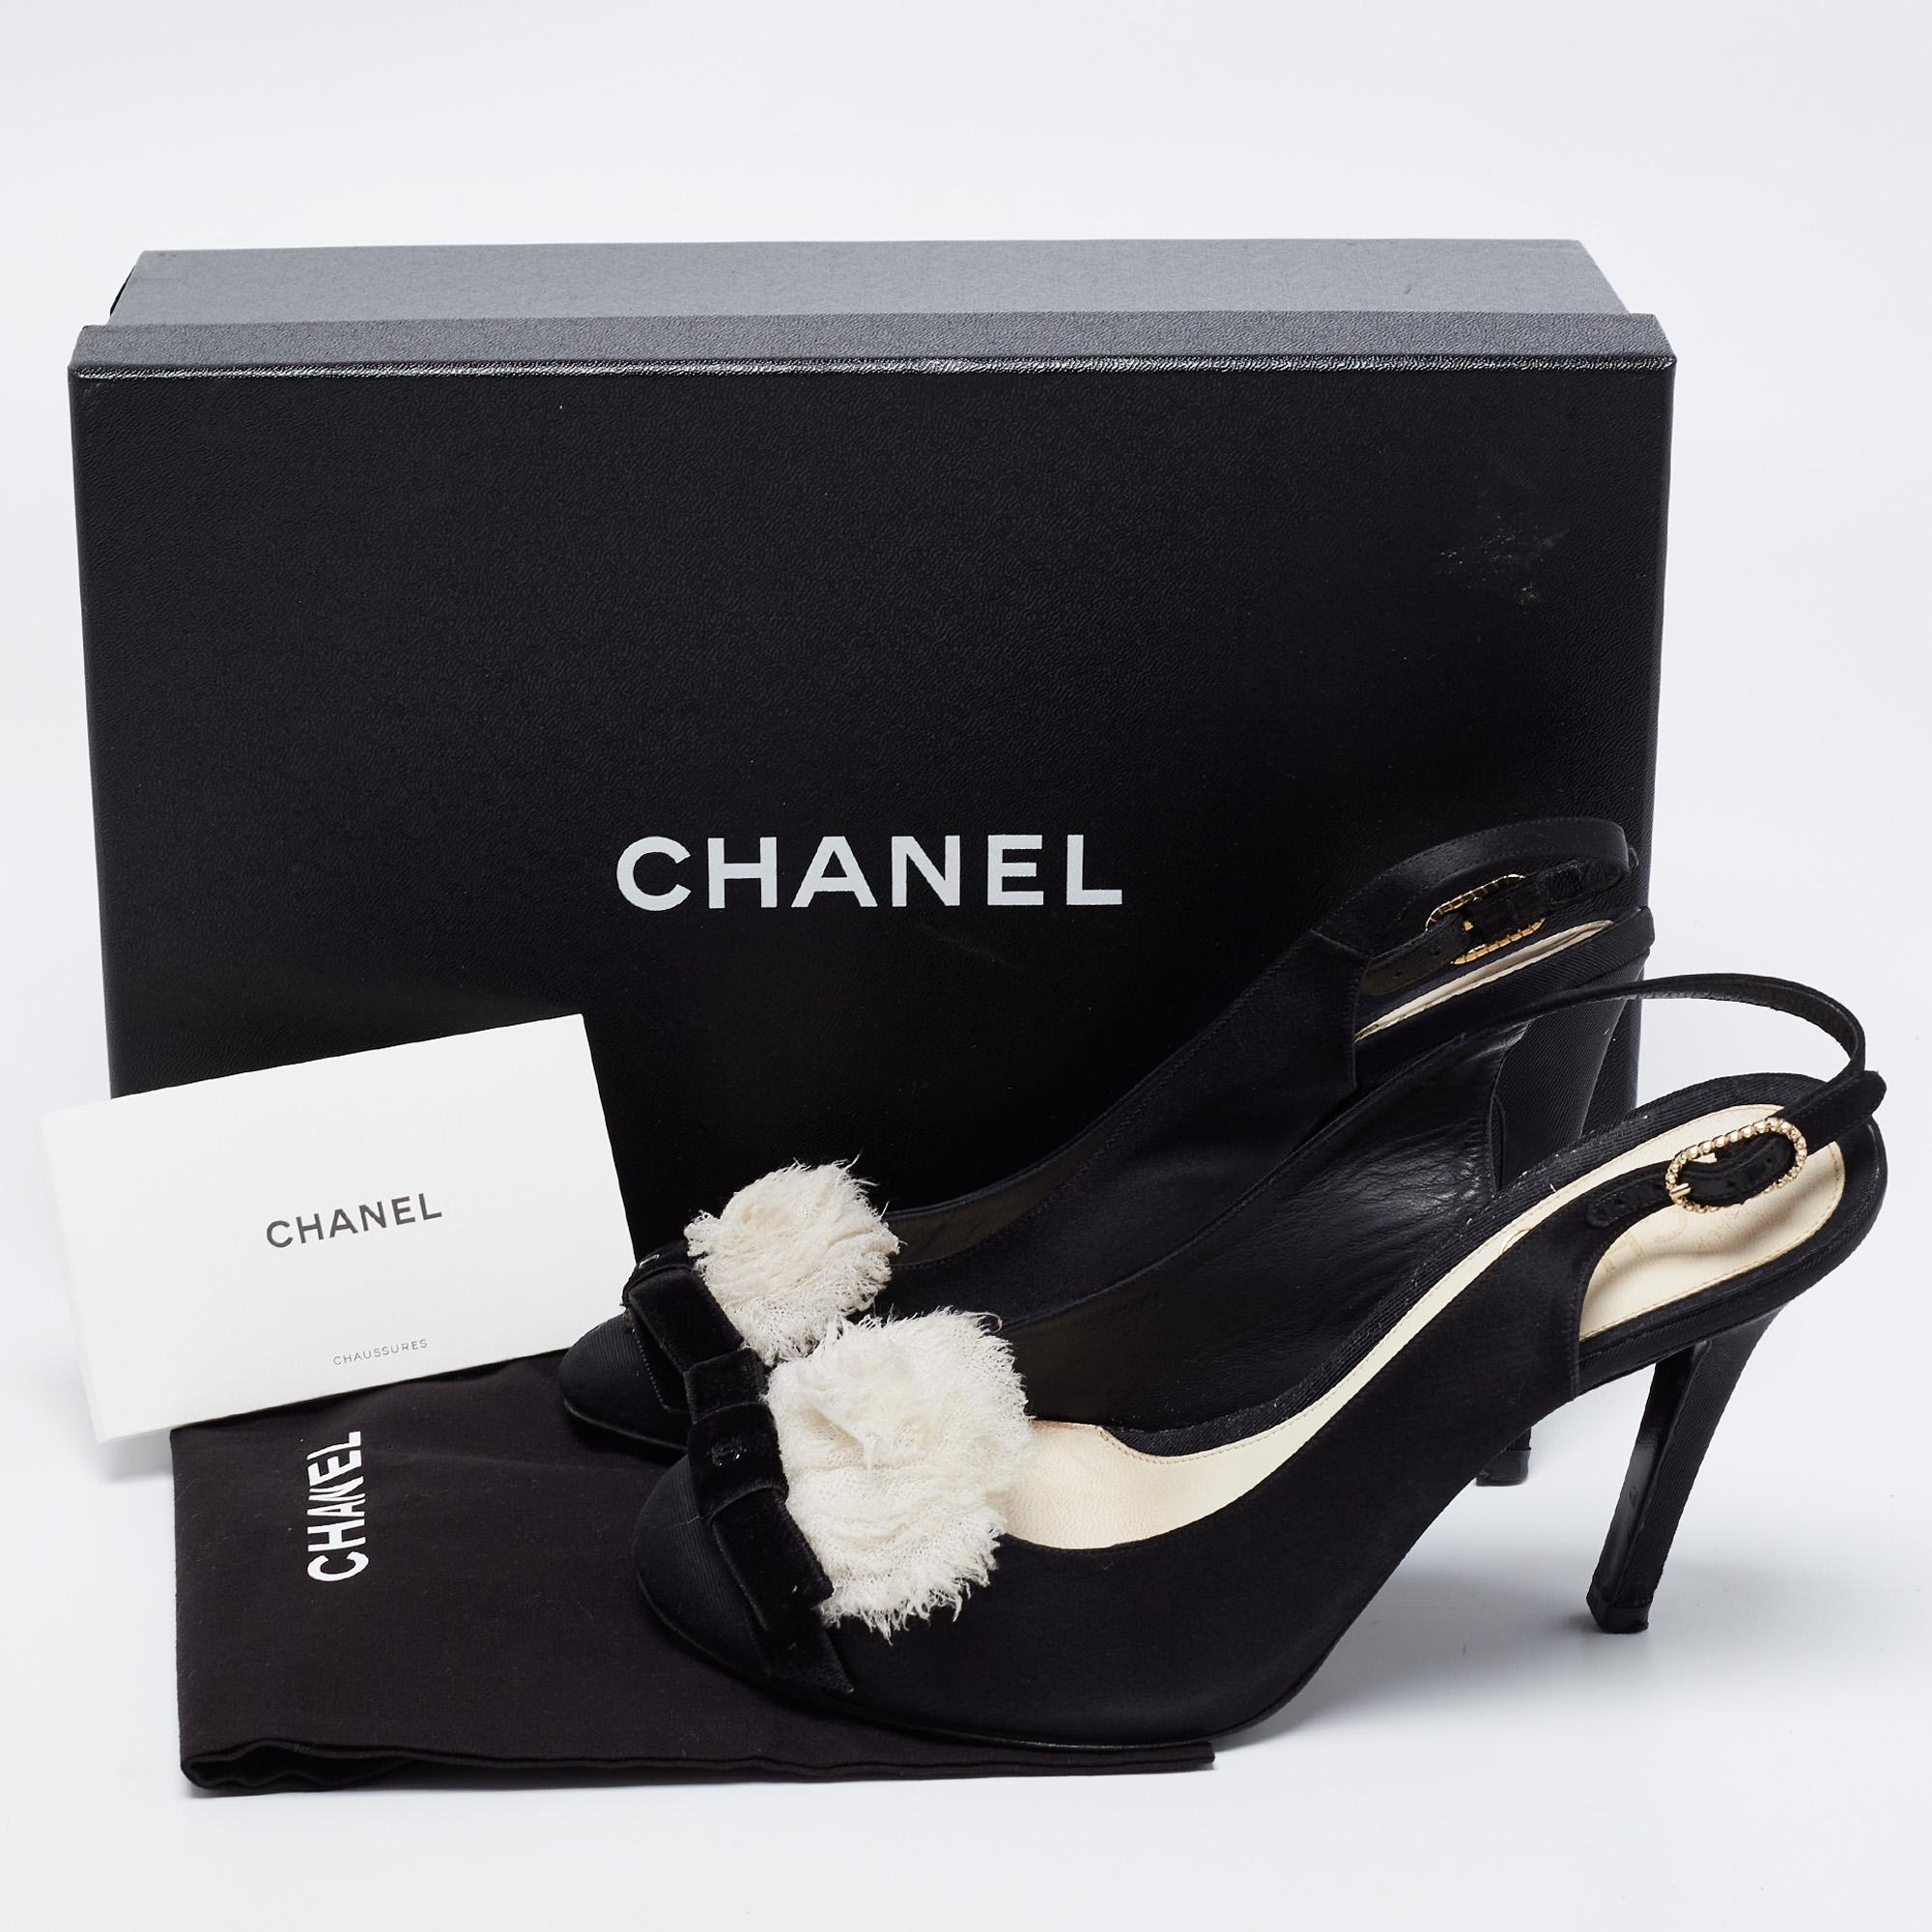 Chanel Black Satin and Fabric CC Bow Slingback Pumps Size 37.5 4